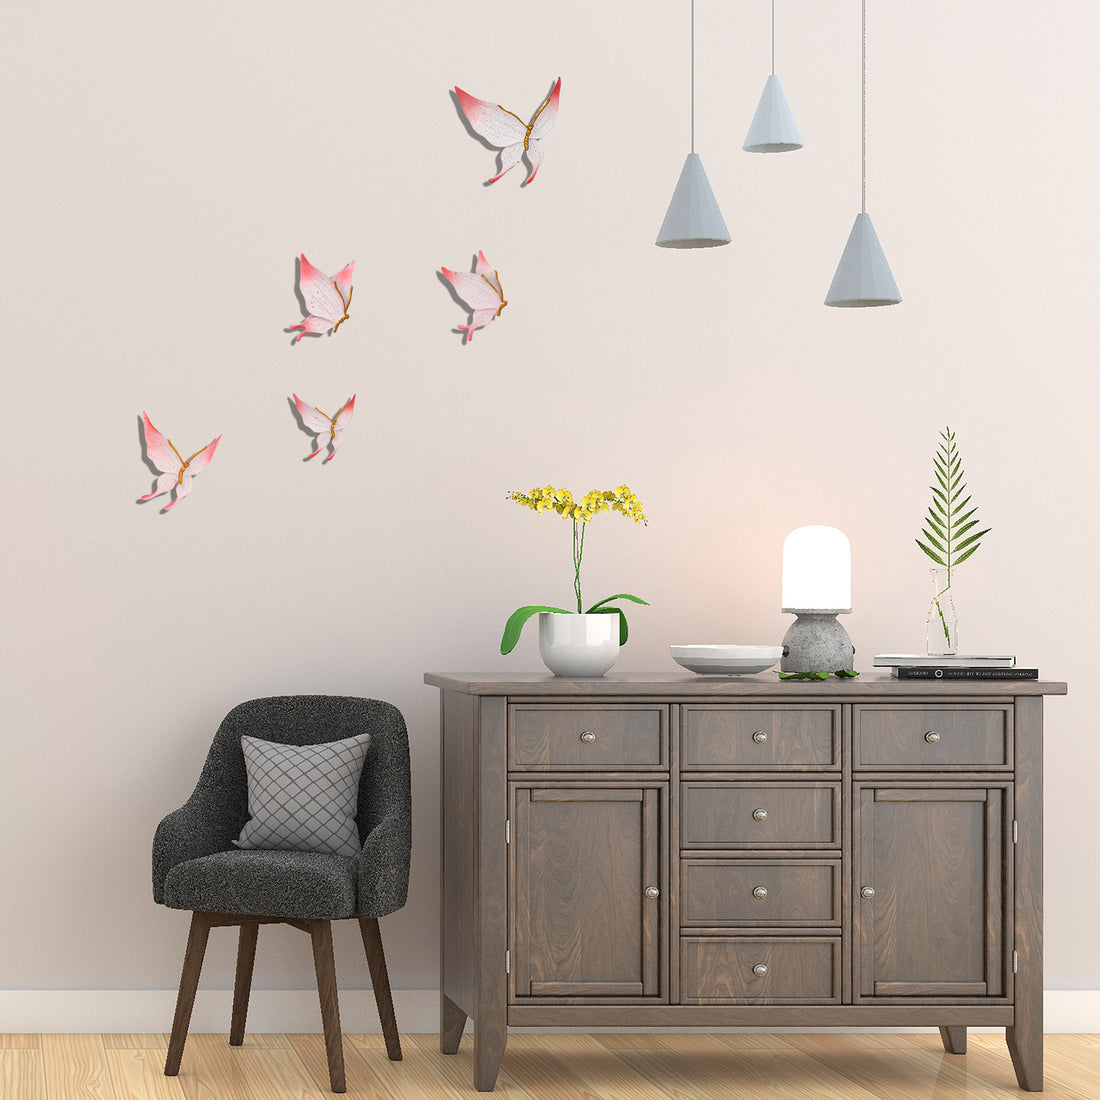 5 Pack Resin Butterfly Wall Art Decoration Cute 3D Wall Sculptures Free Flying Theme Ornaments Suitable for Living Room Bedroom Cafe Bar Hotel